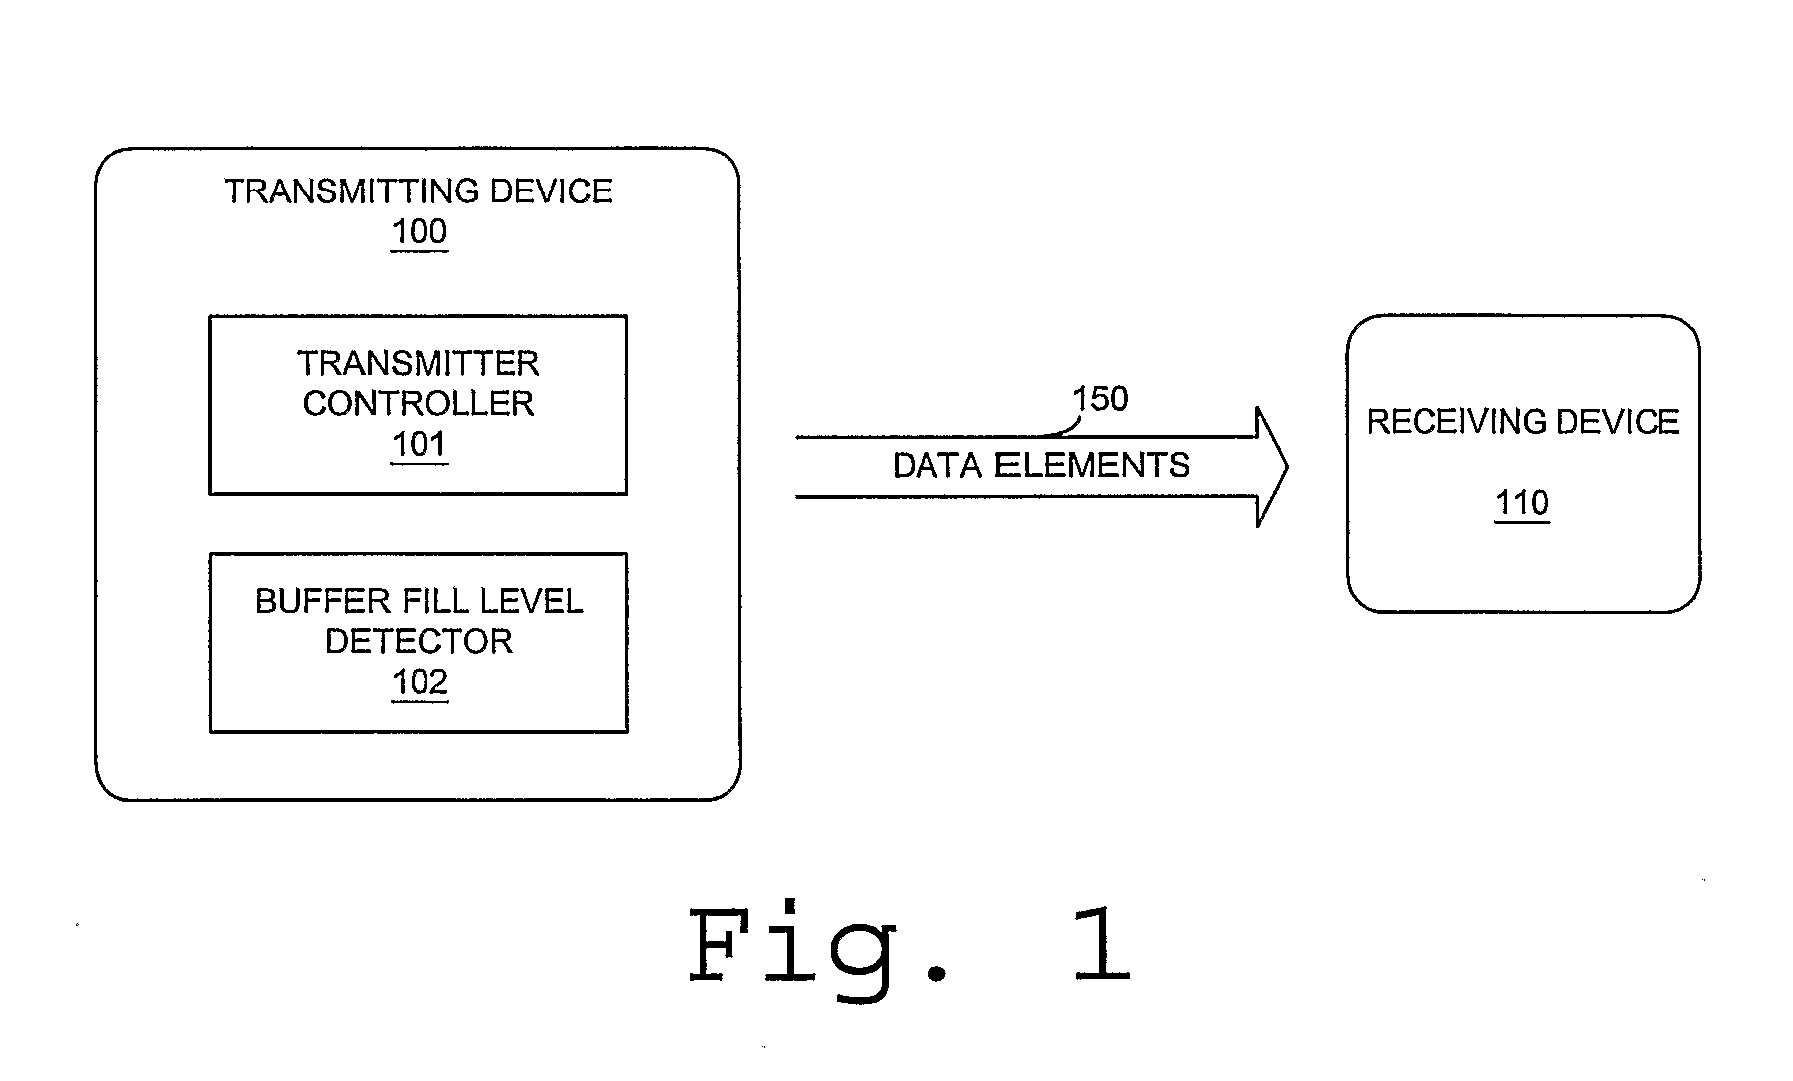 Packet Scheduling for Data Stream Transmission